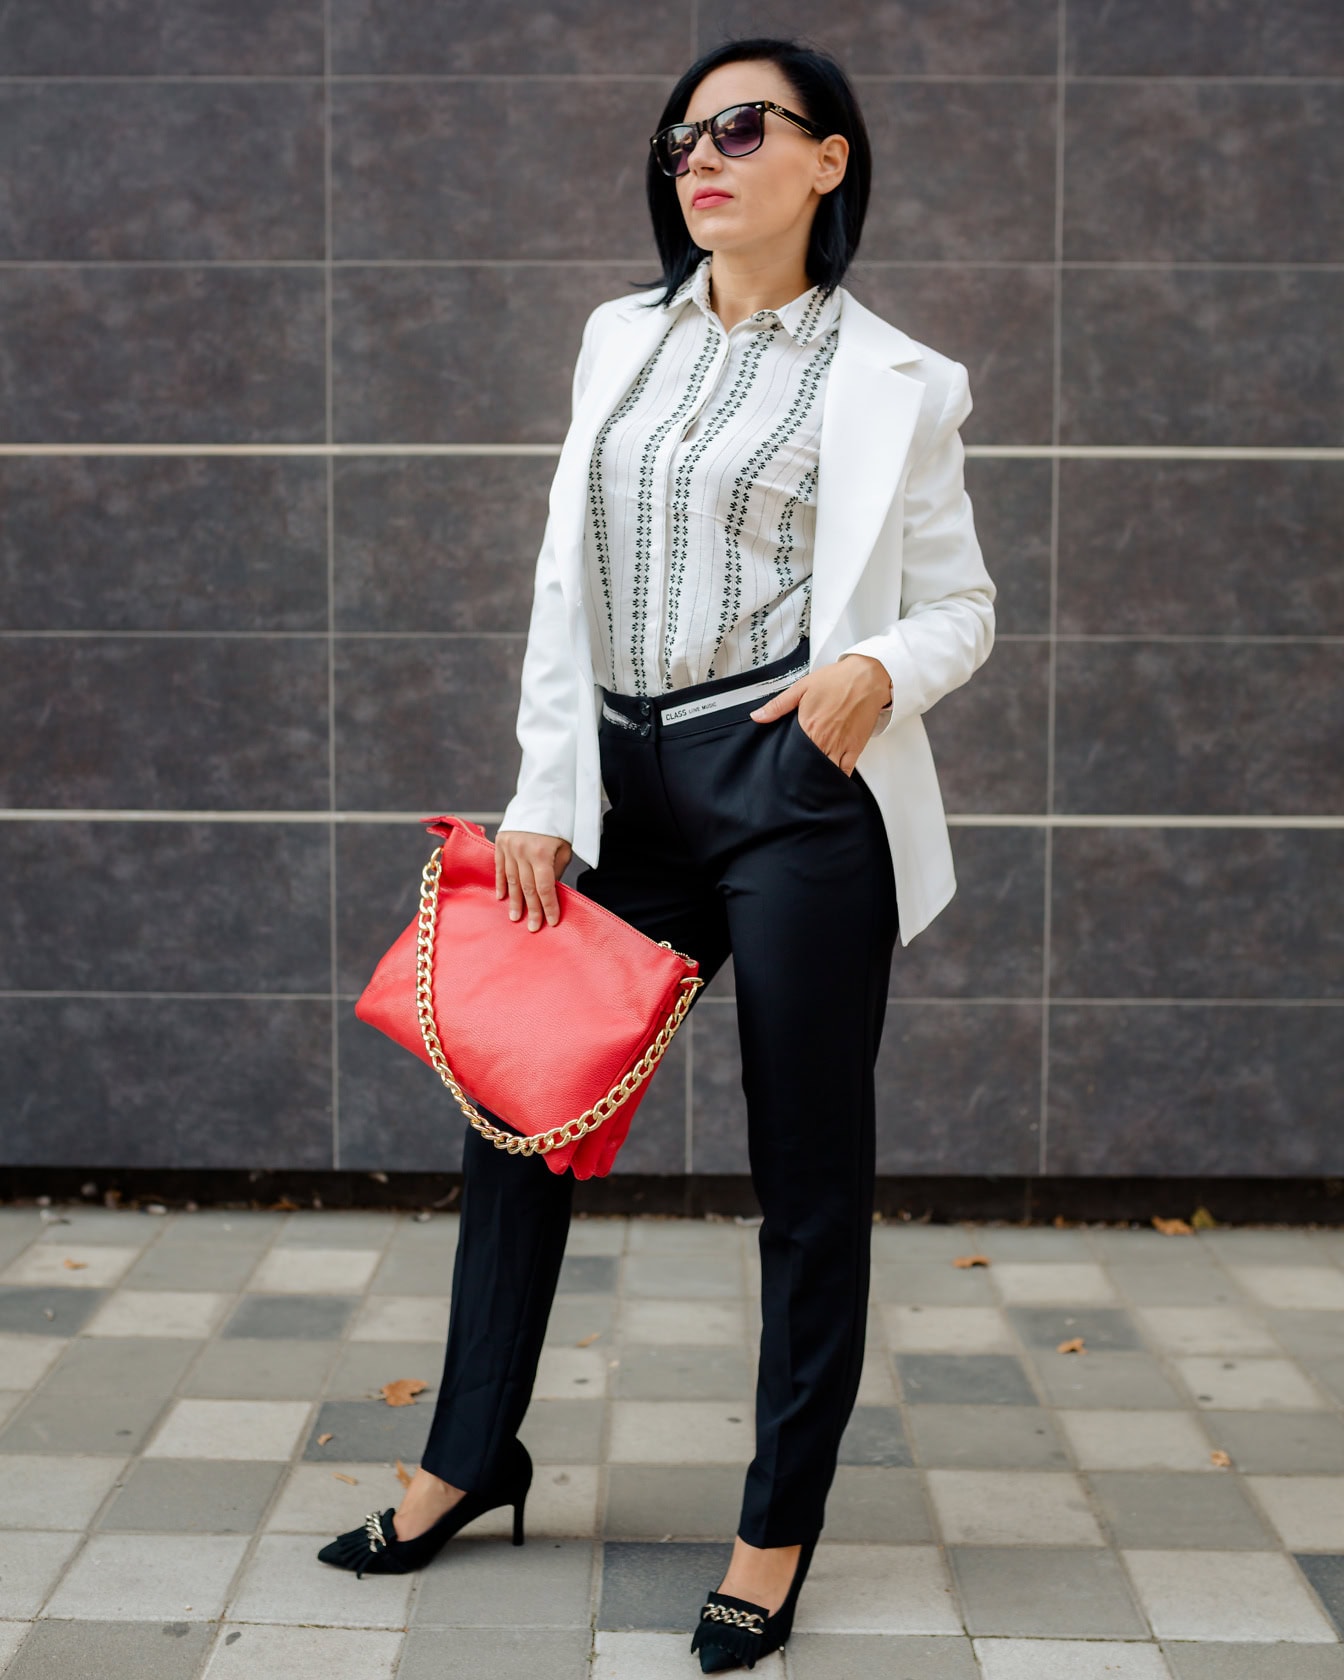 Handsome businesswoman poses in a black and white suit with a red purse with a gold chain handle